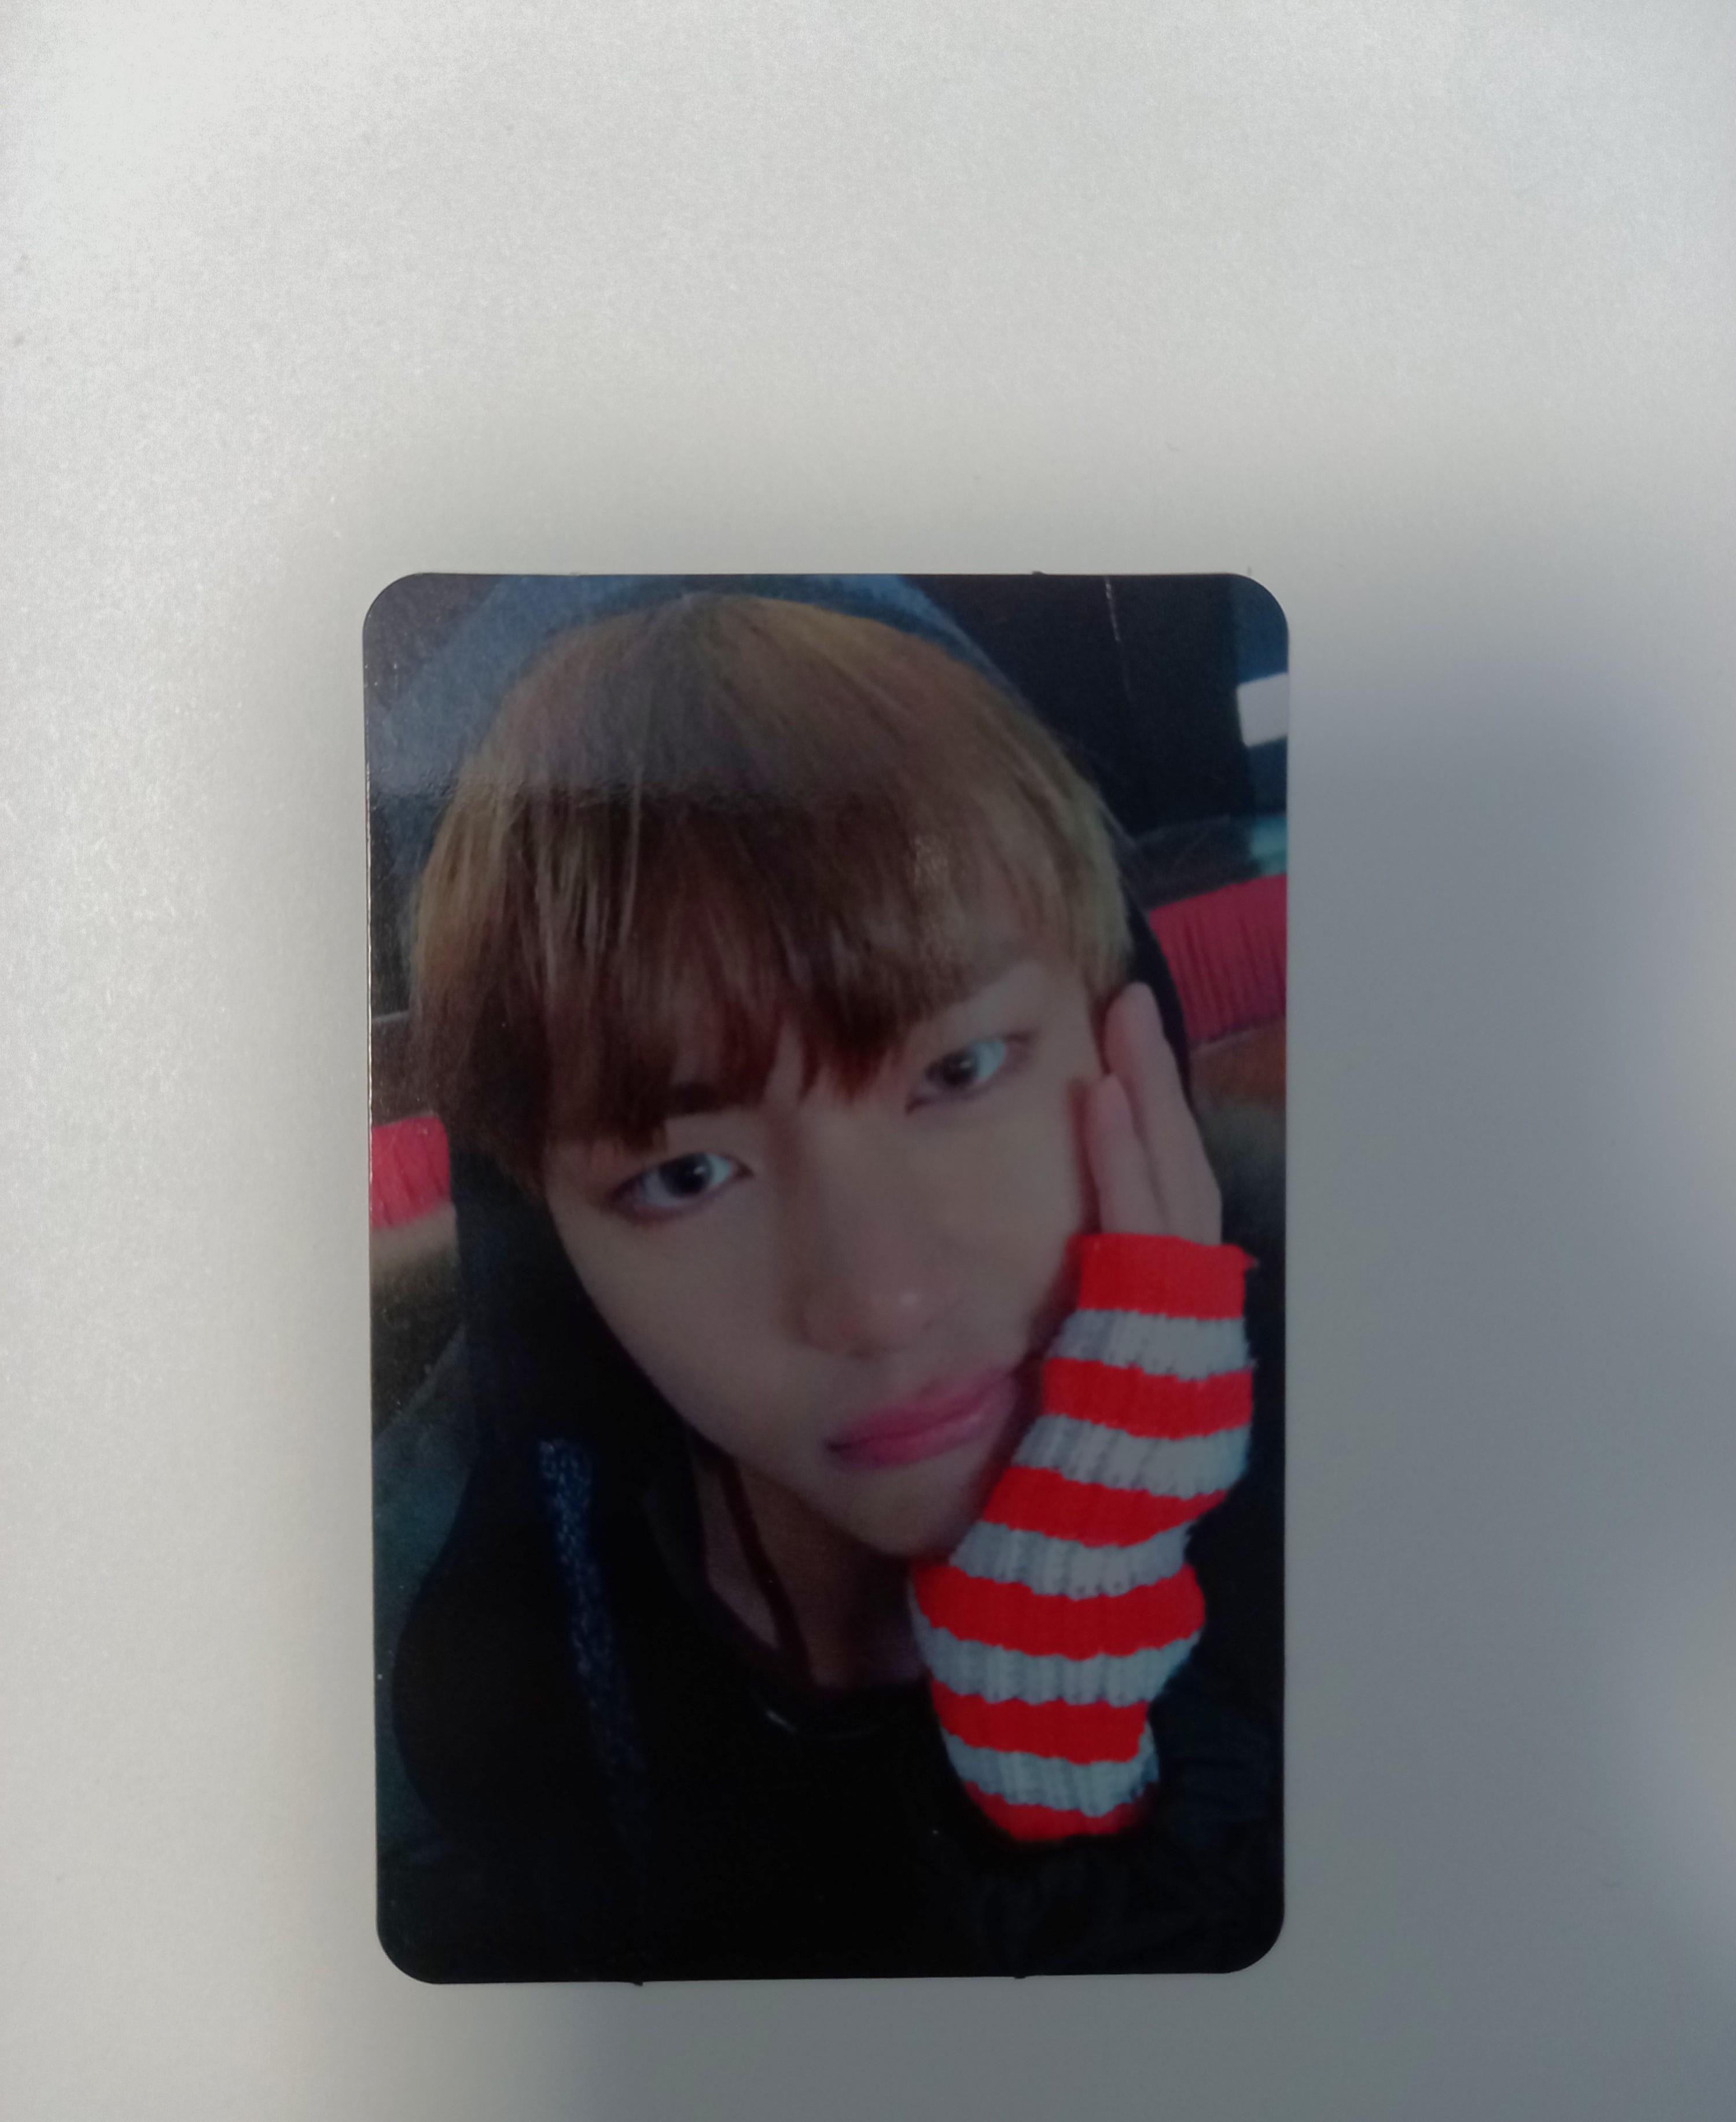 Wts Bts Taehyung Photocard Ynwa You Never Walk Alone Hobbies Toys Memorabilia Collectibles K Wave On Carousell